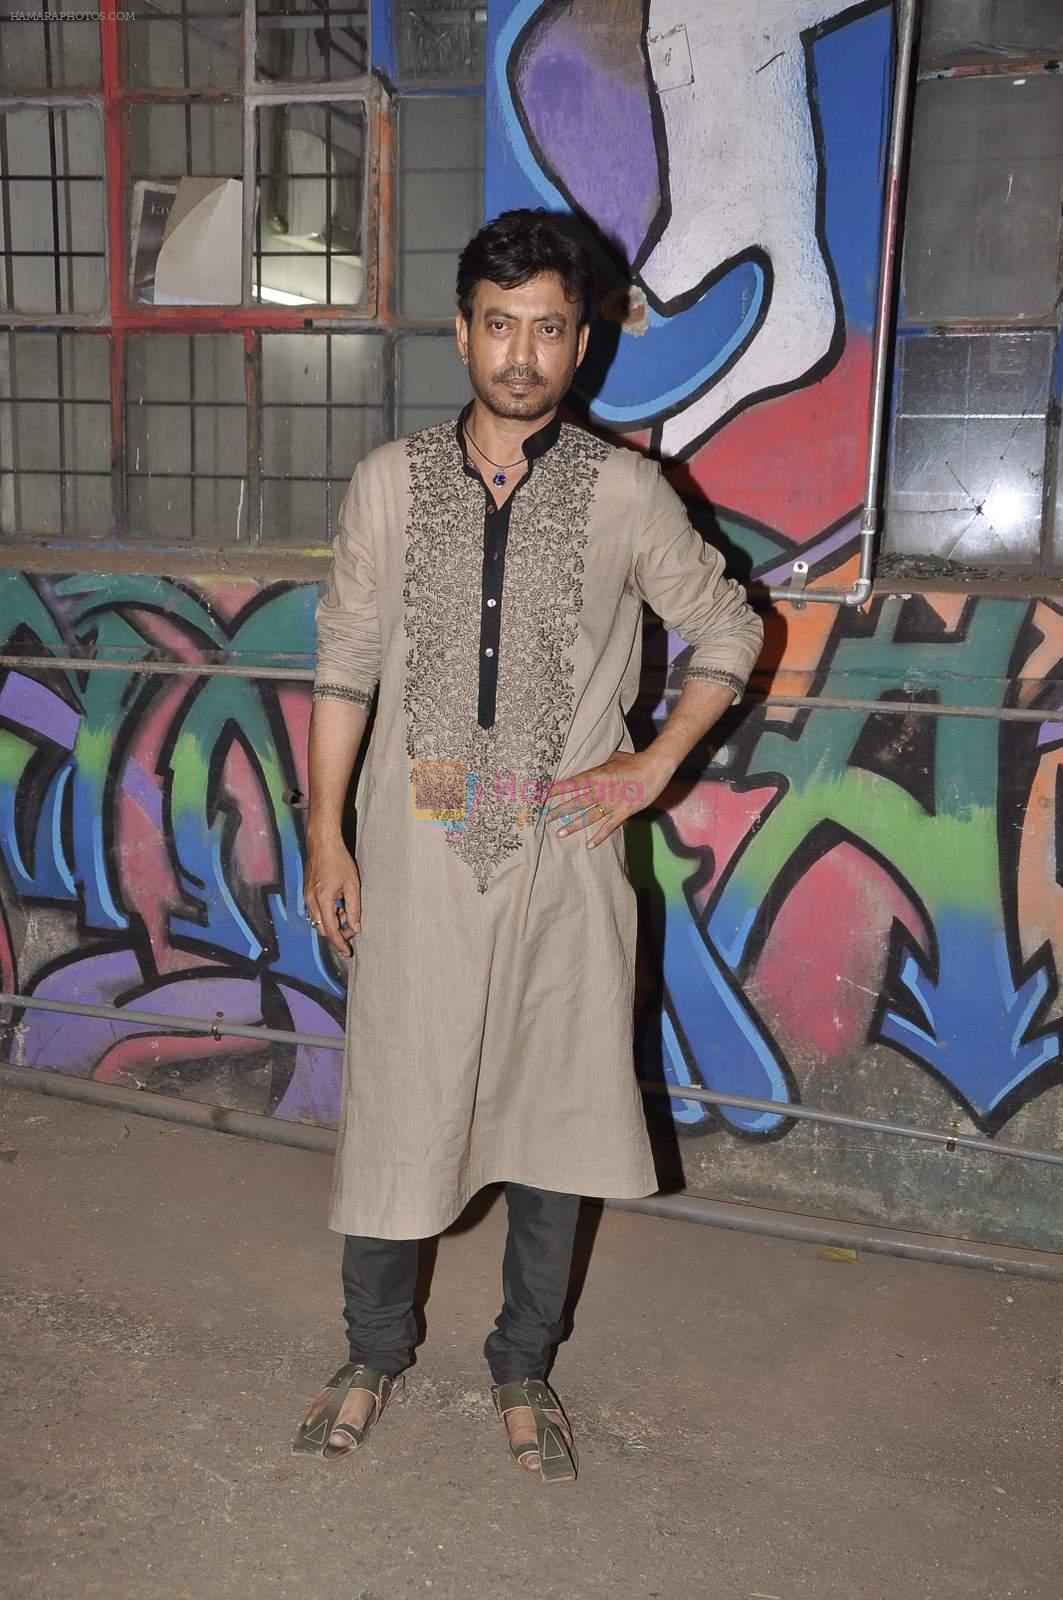 Irrfan Khan at Sabyasachi show in Byculla on 17th March 2015